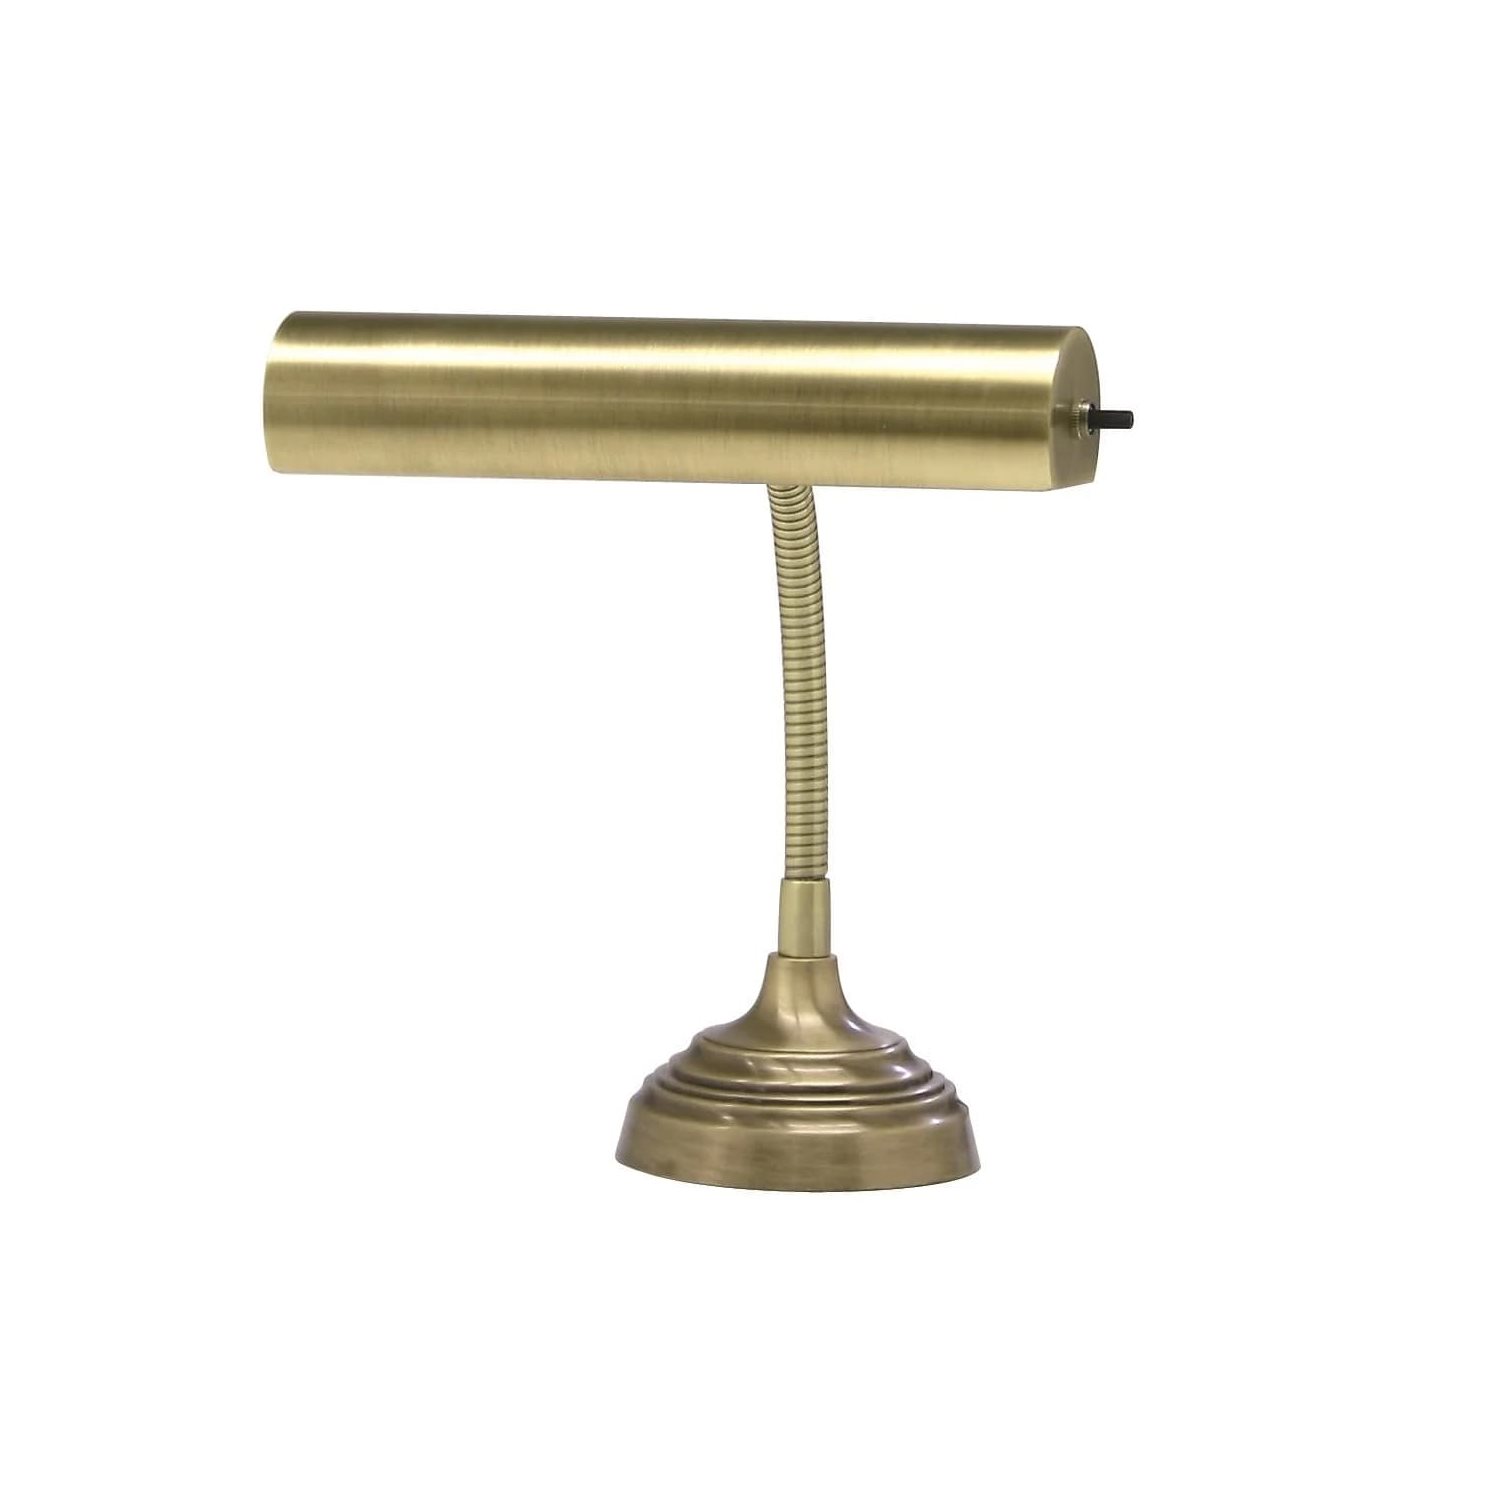 HOUSE OF TROY - AP10-20-71 - Advent Piano / Desk Lamp - 10" - Antique Brass